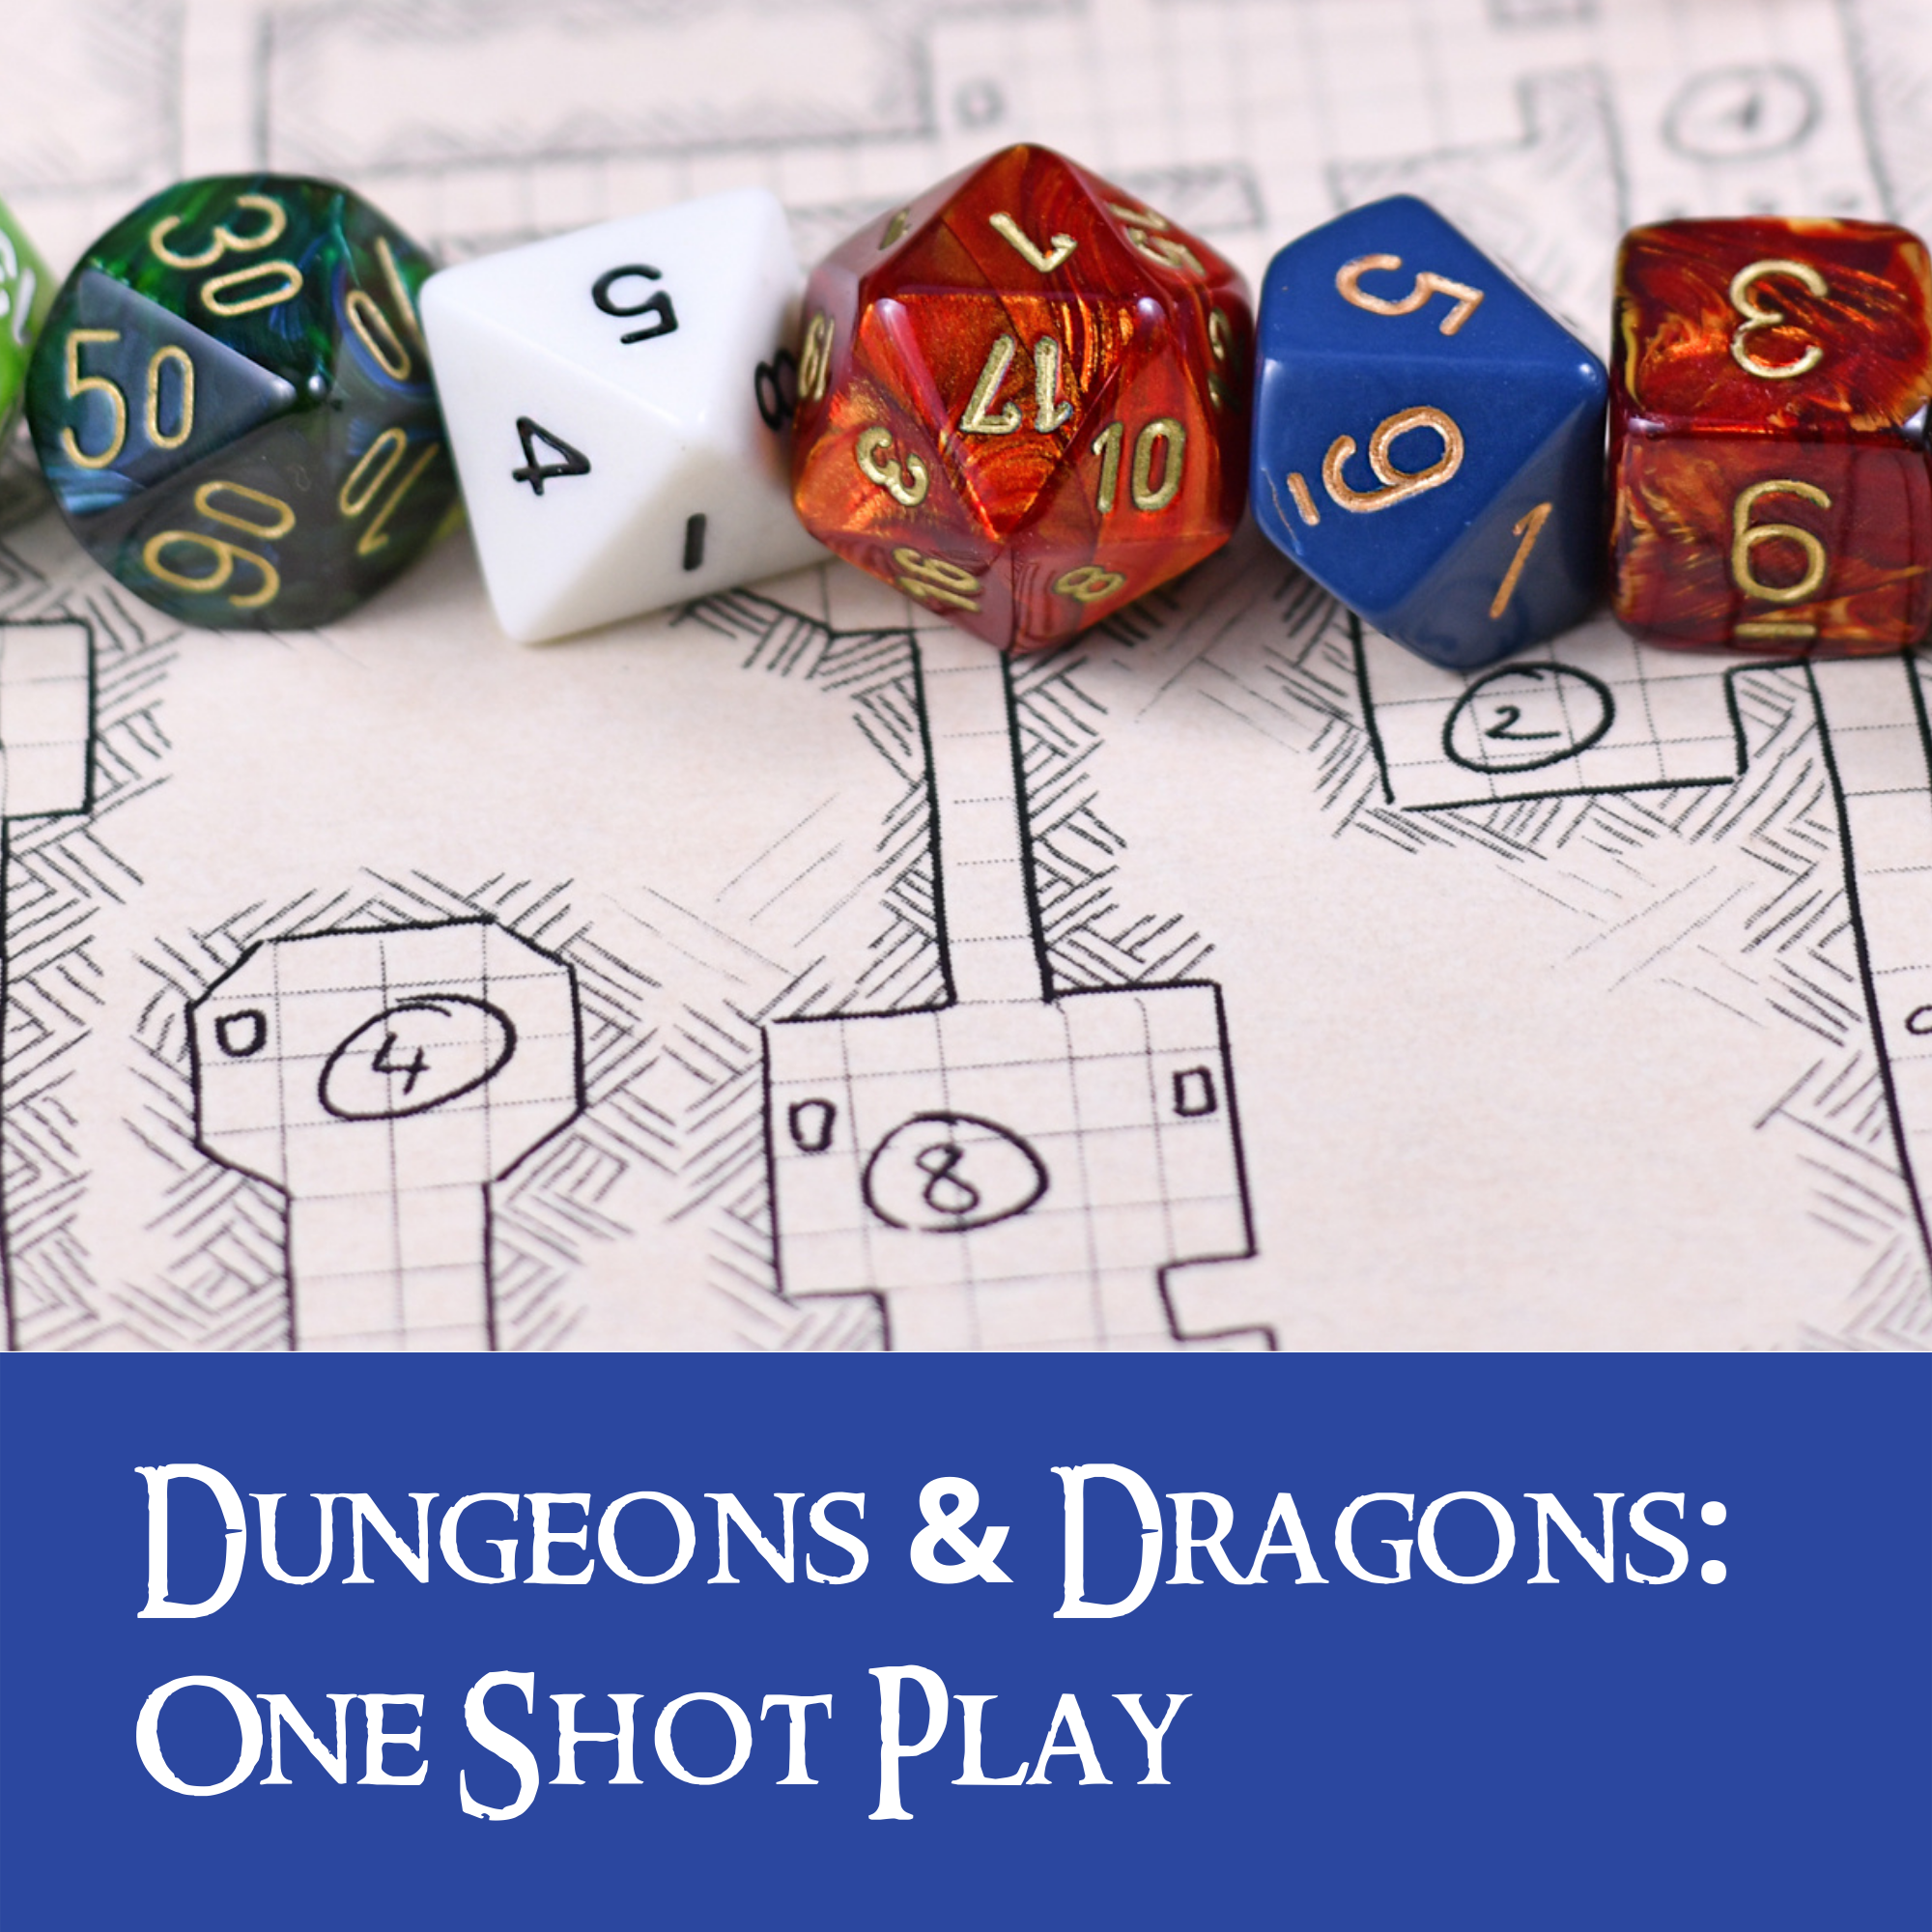 Dungeons & Dragons: One Shot Play